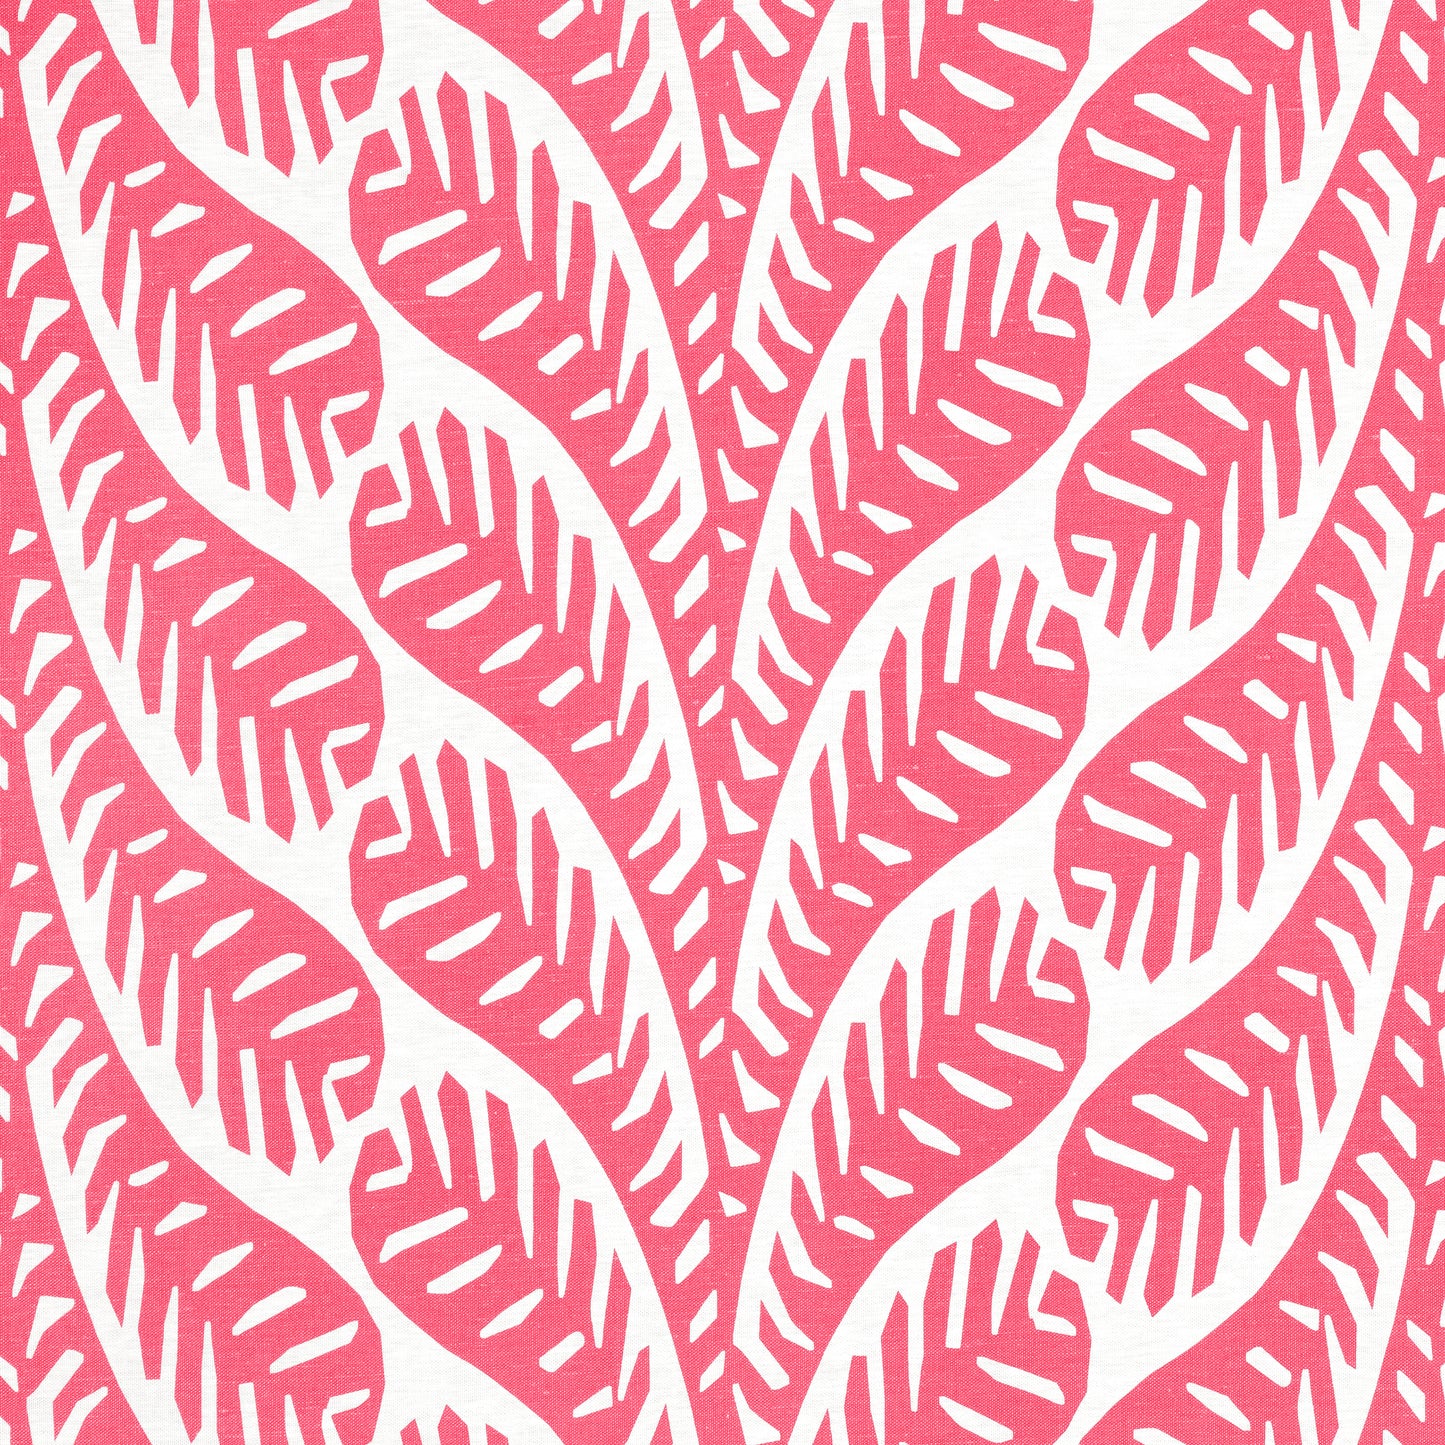 Purchase Thibaut Fabric Item# F920831 pattern name Ginger color Pink